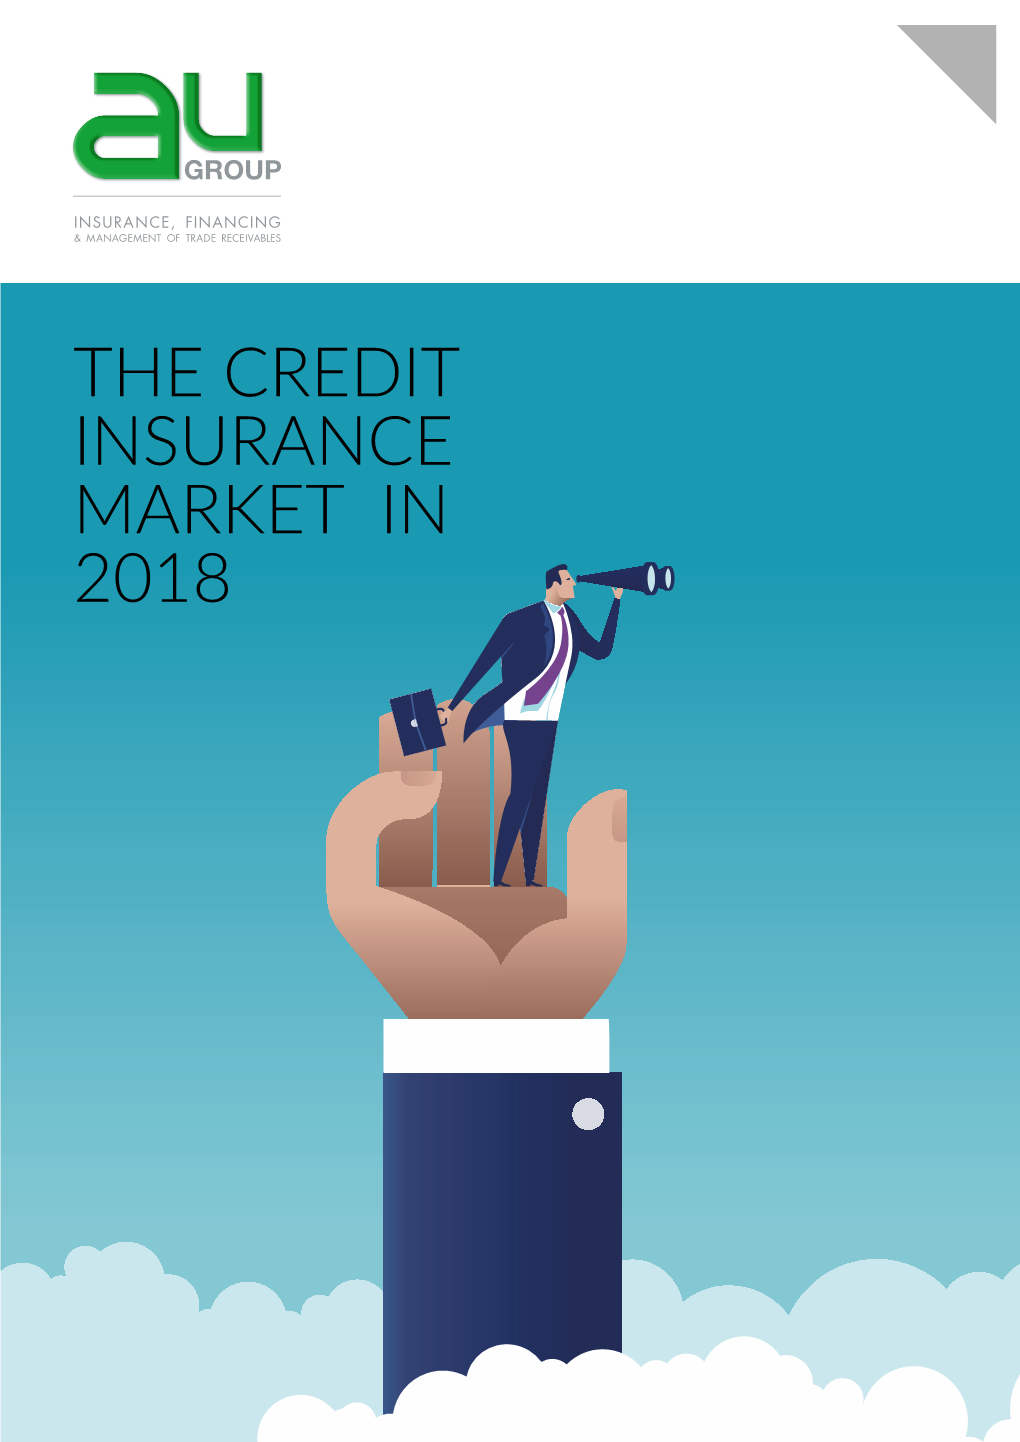 The Credit Insurance Market in 2018 02 2017 Trends & Main Drivers for Growth in 2018